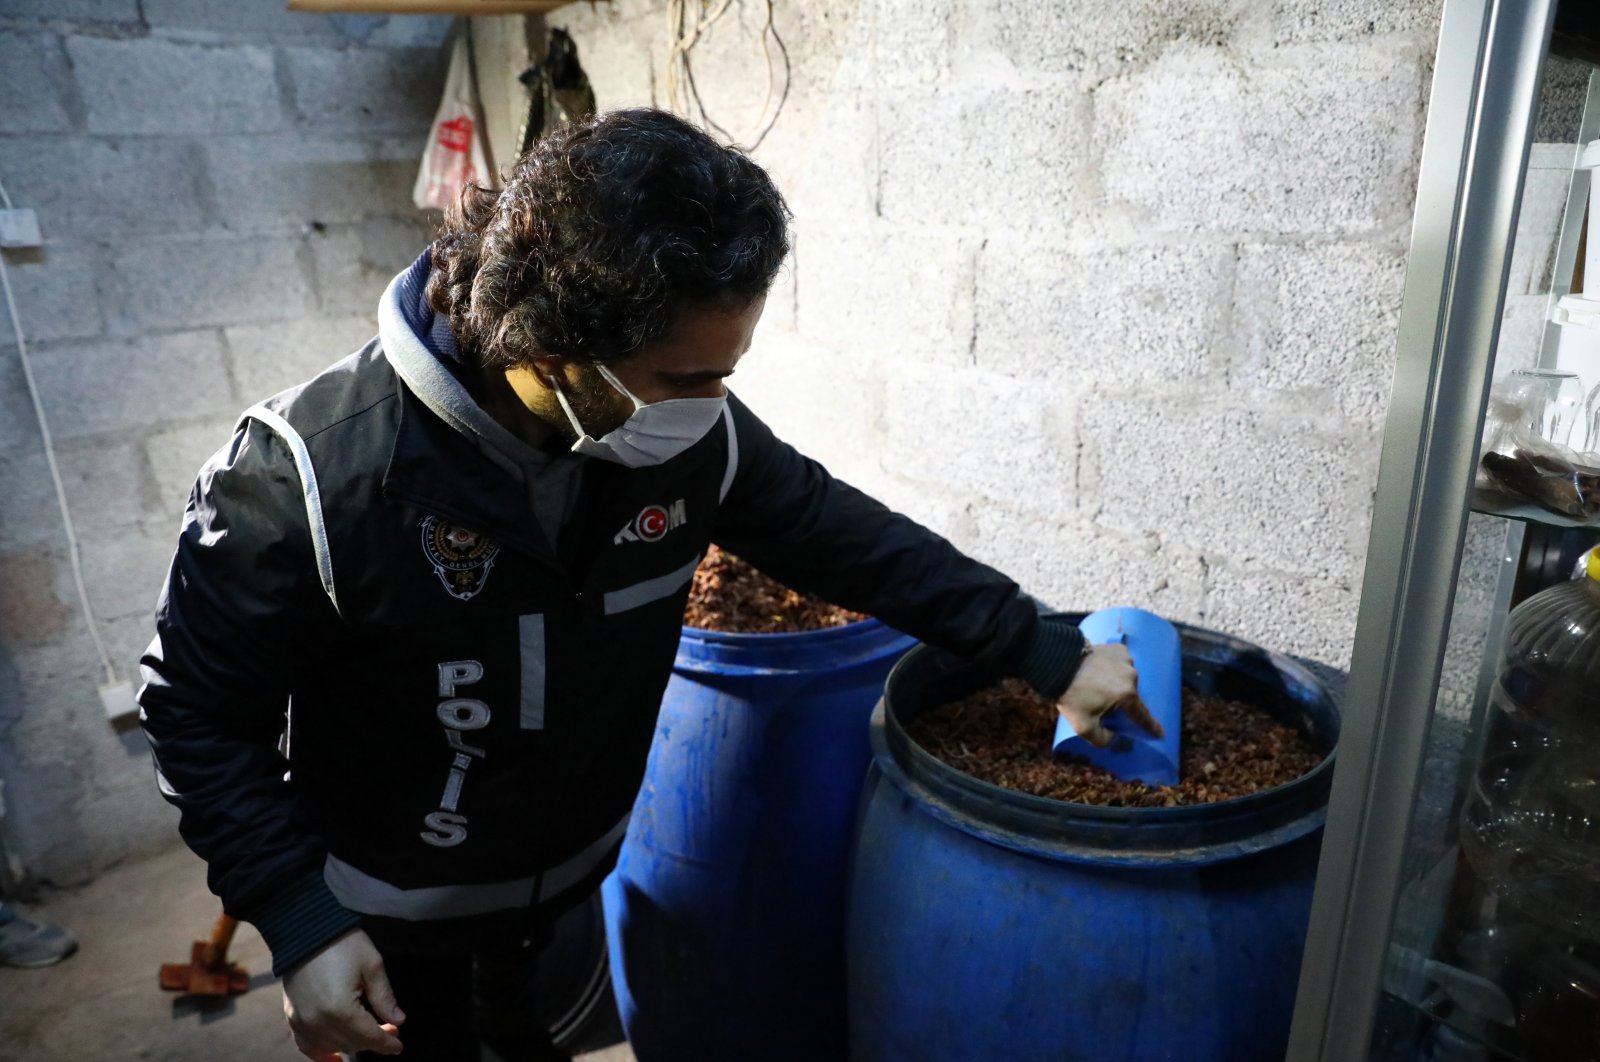 A police officer checks materials used in bootleg liquor production seized in an operation in Adana, southern Turkey, Dec. 16, 2021. (PHOTO BY ZİYA RAMOĞLU)